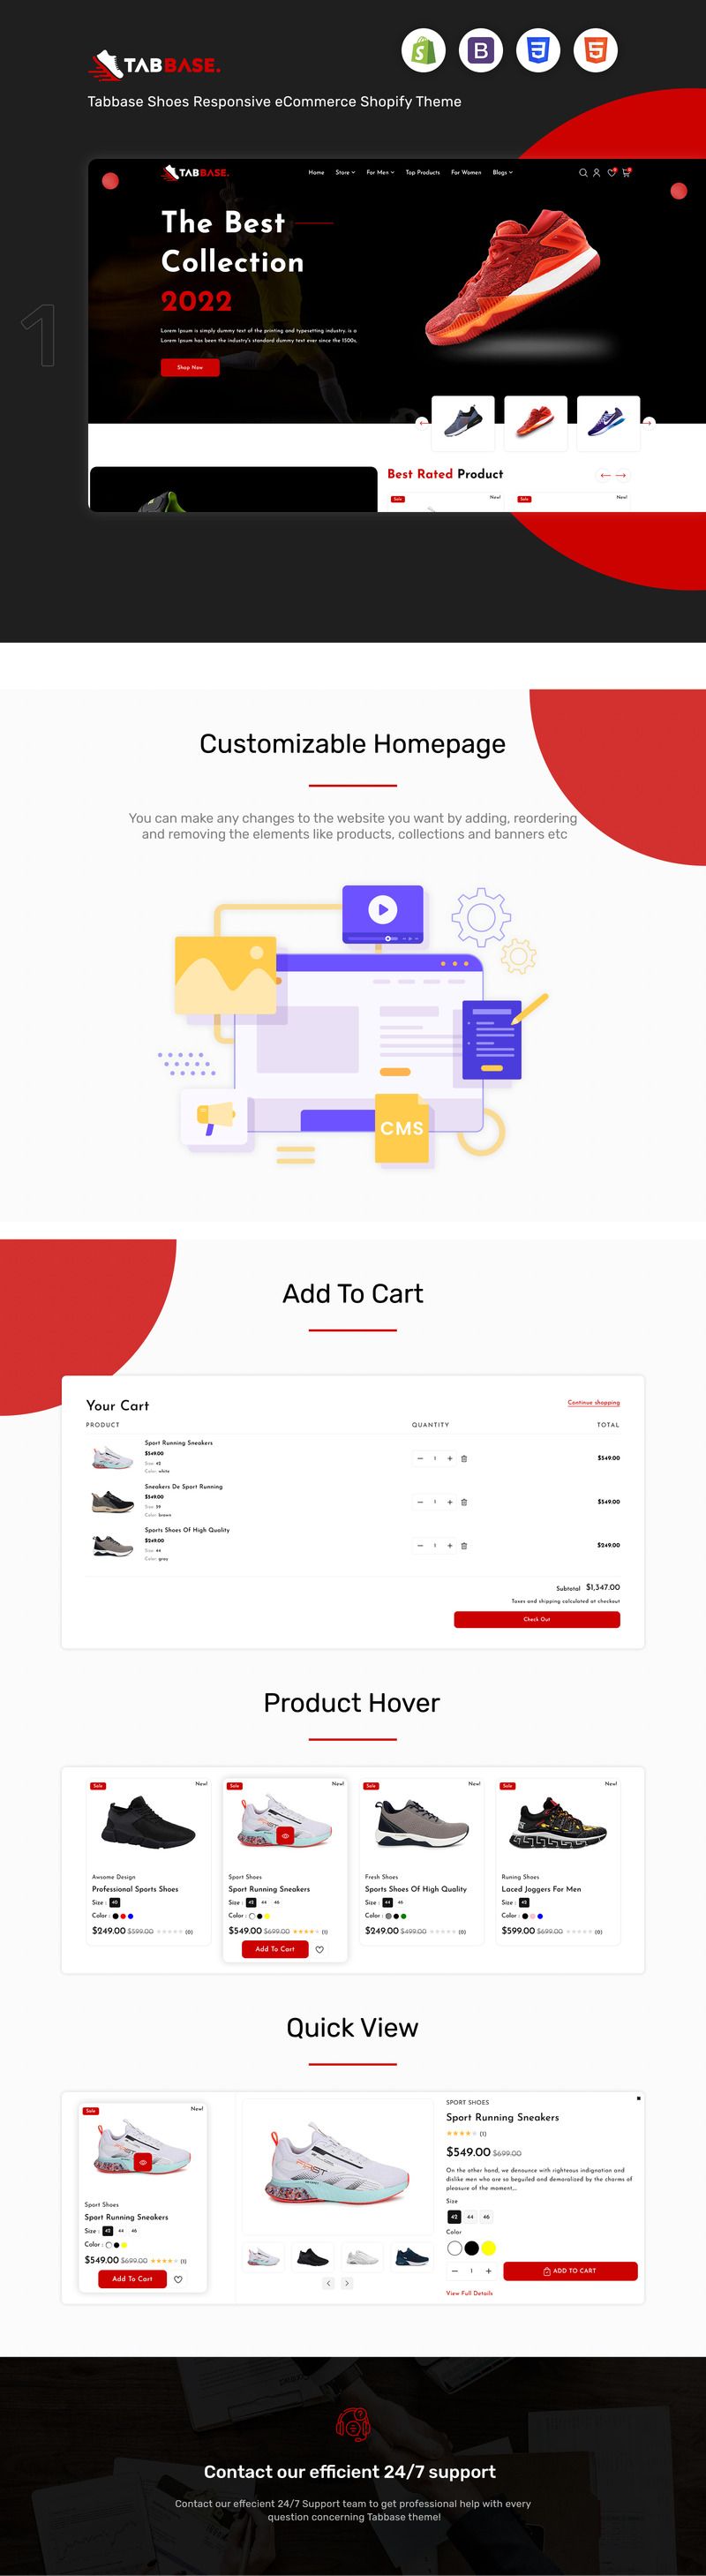 Tabbase - Multipurpose Footwear & Shoes Shopify 2.0 Theme - Features Image 1